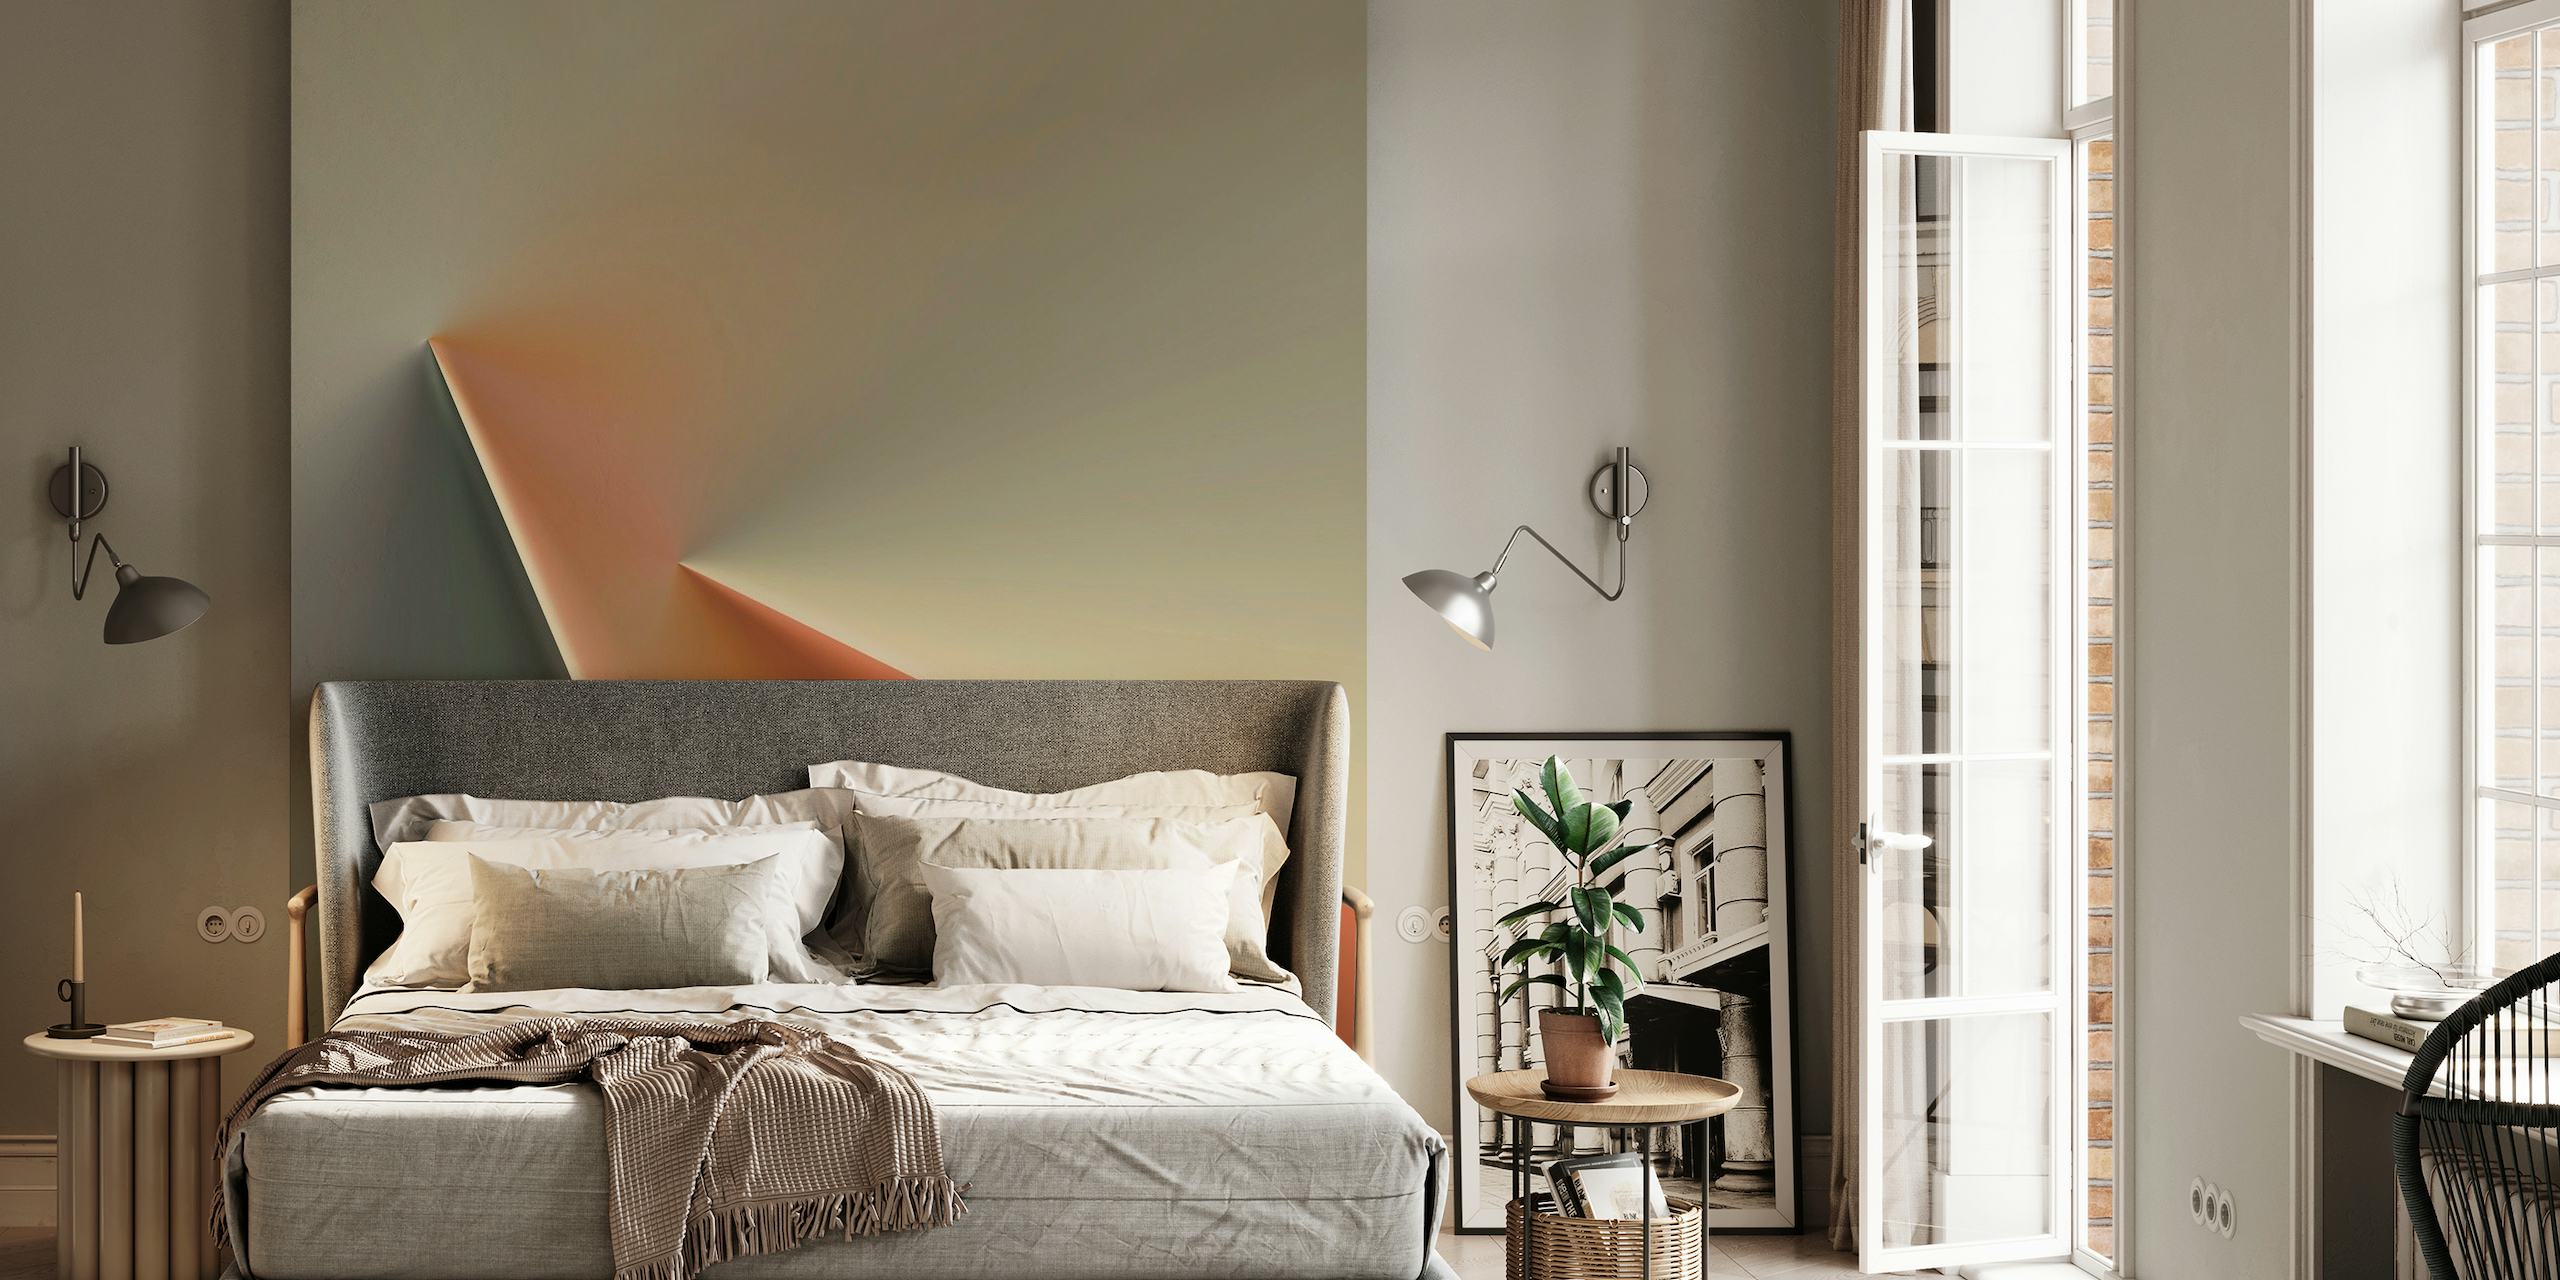 Abstract light green to orange gradient wall mural